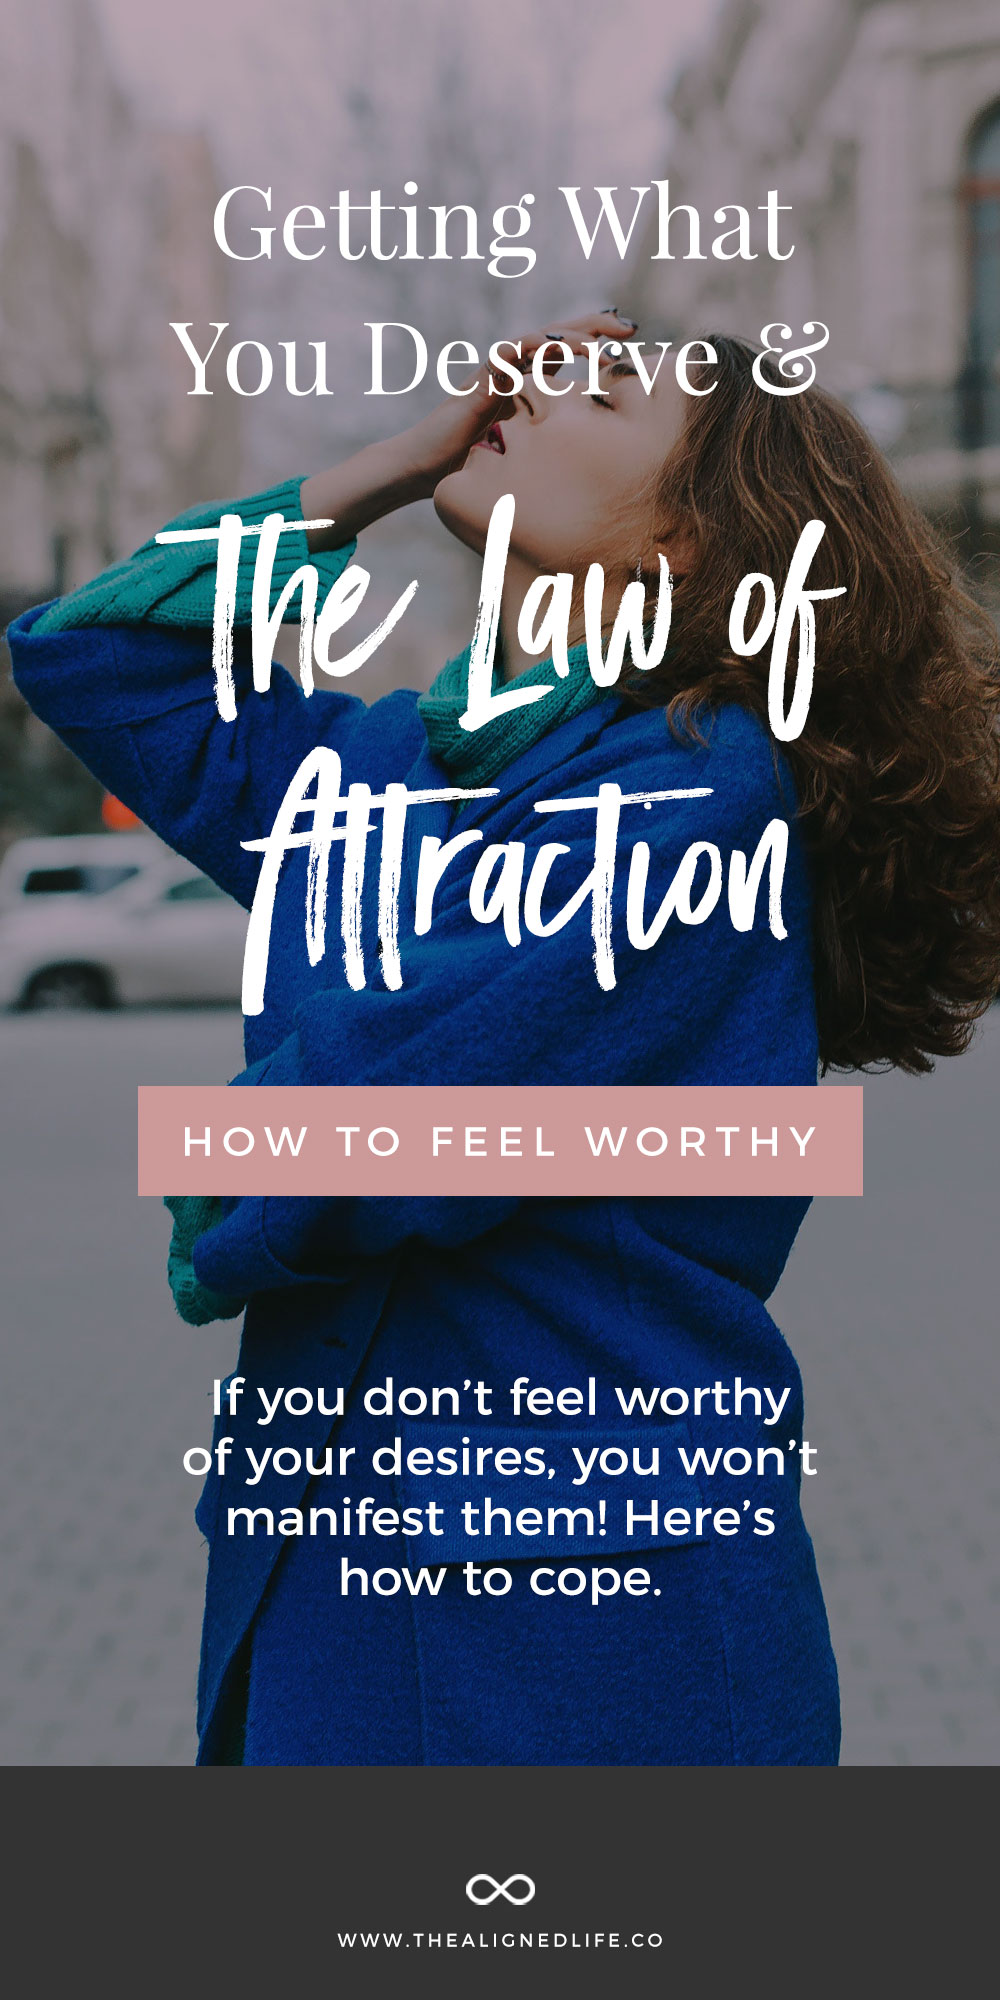 Getting What You Deserve & The Law of Attraction